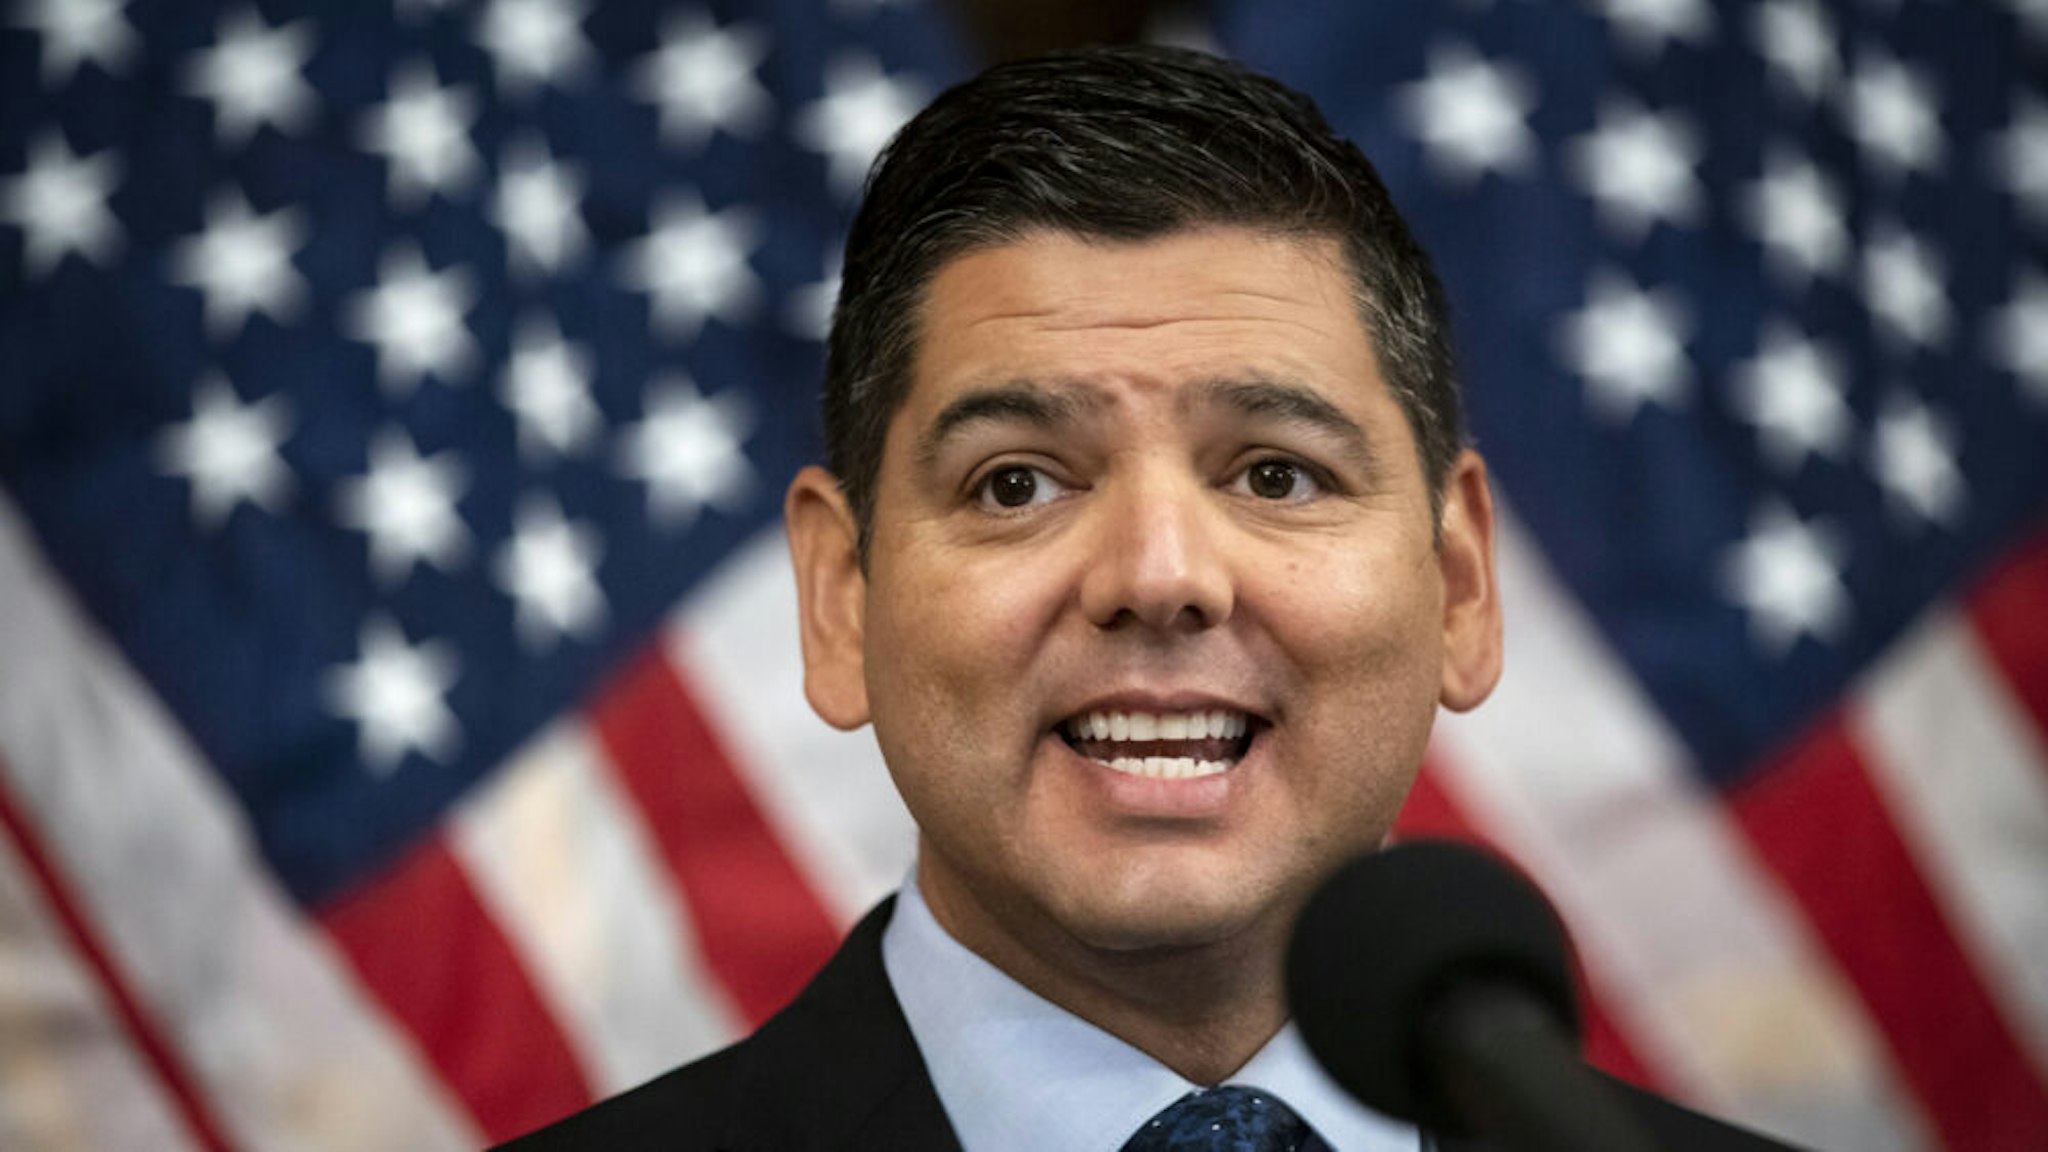 Representative Raul Ruiz, a Democrat from California, speaks during a news conference unveiling the Patient Protection &amp; Affordable Care Enhancement Act at the U.S Capitol in Washington, D.C., U.S., on Wednesday, June 24, 2020. Democrats, seeking to draw a contrast with President Donald Trump's health agenda before the November elections, plan to vote this week on a package of measures to strengthen Obamacare.